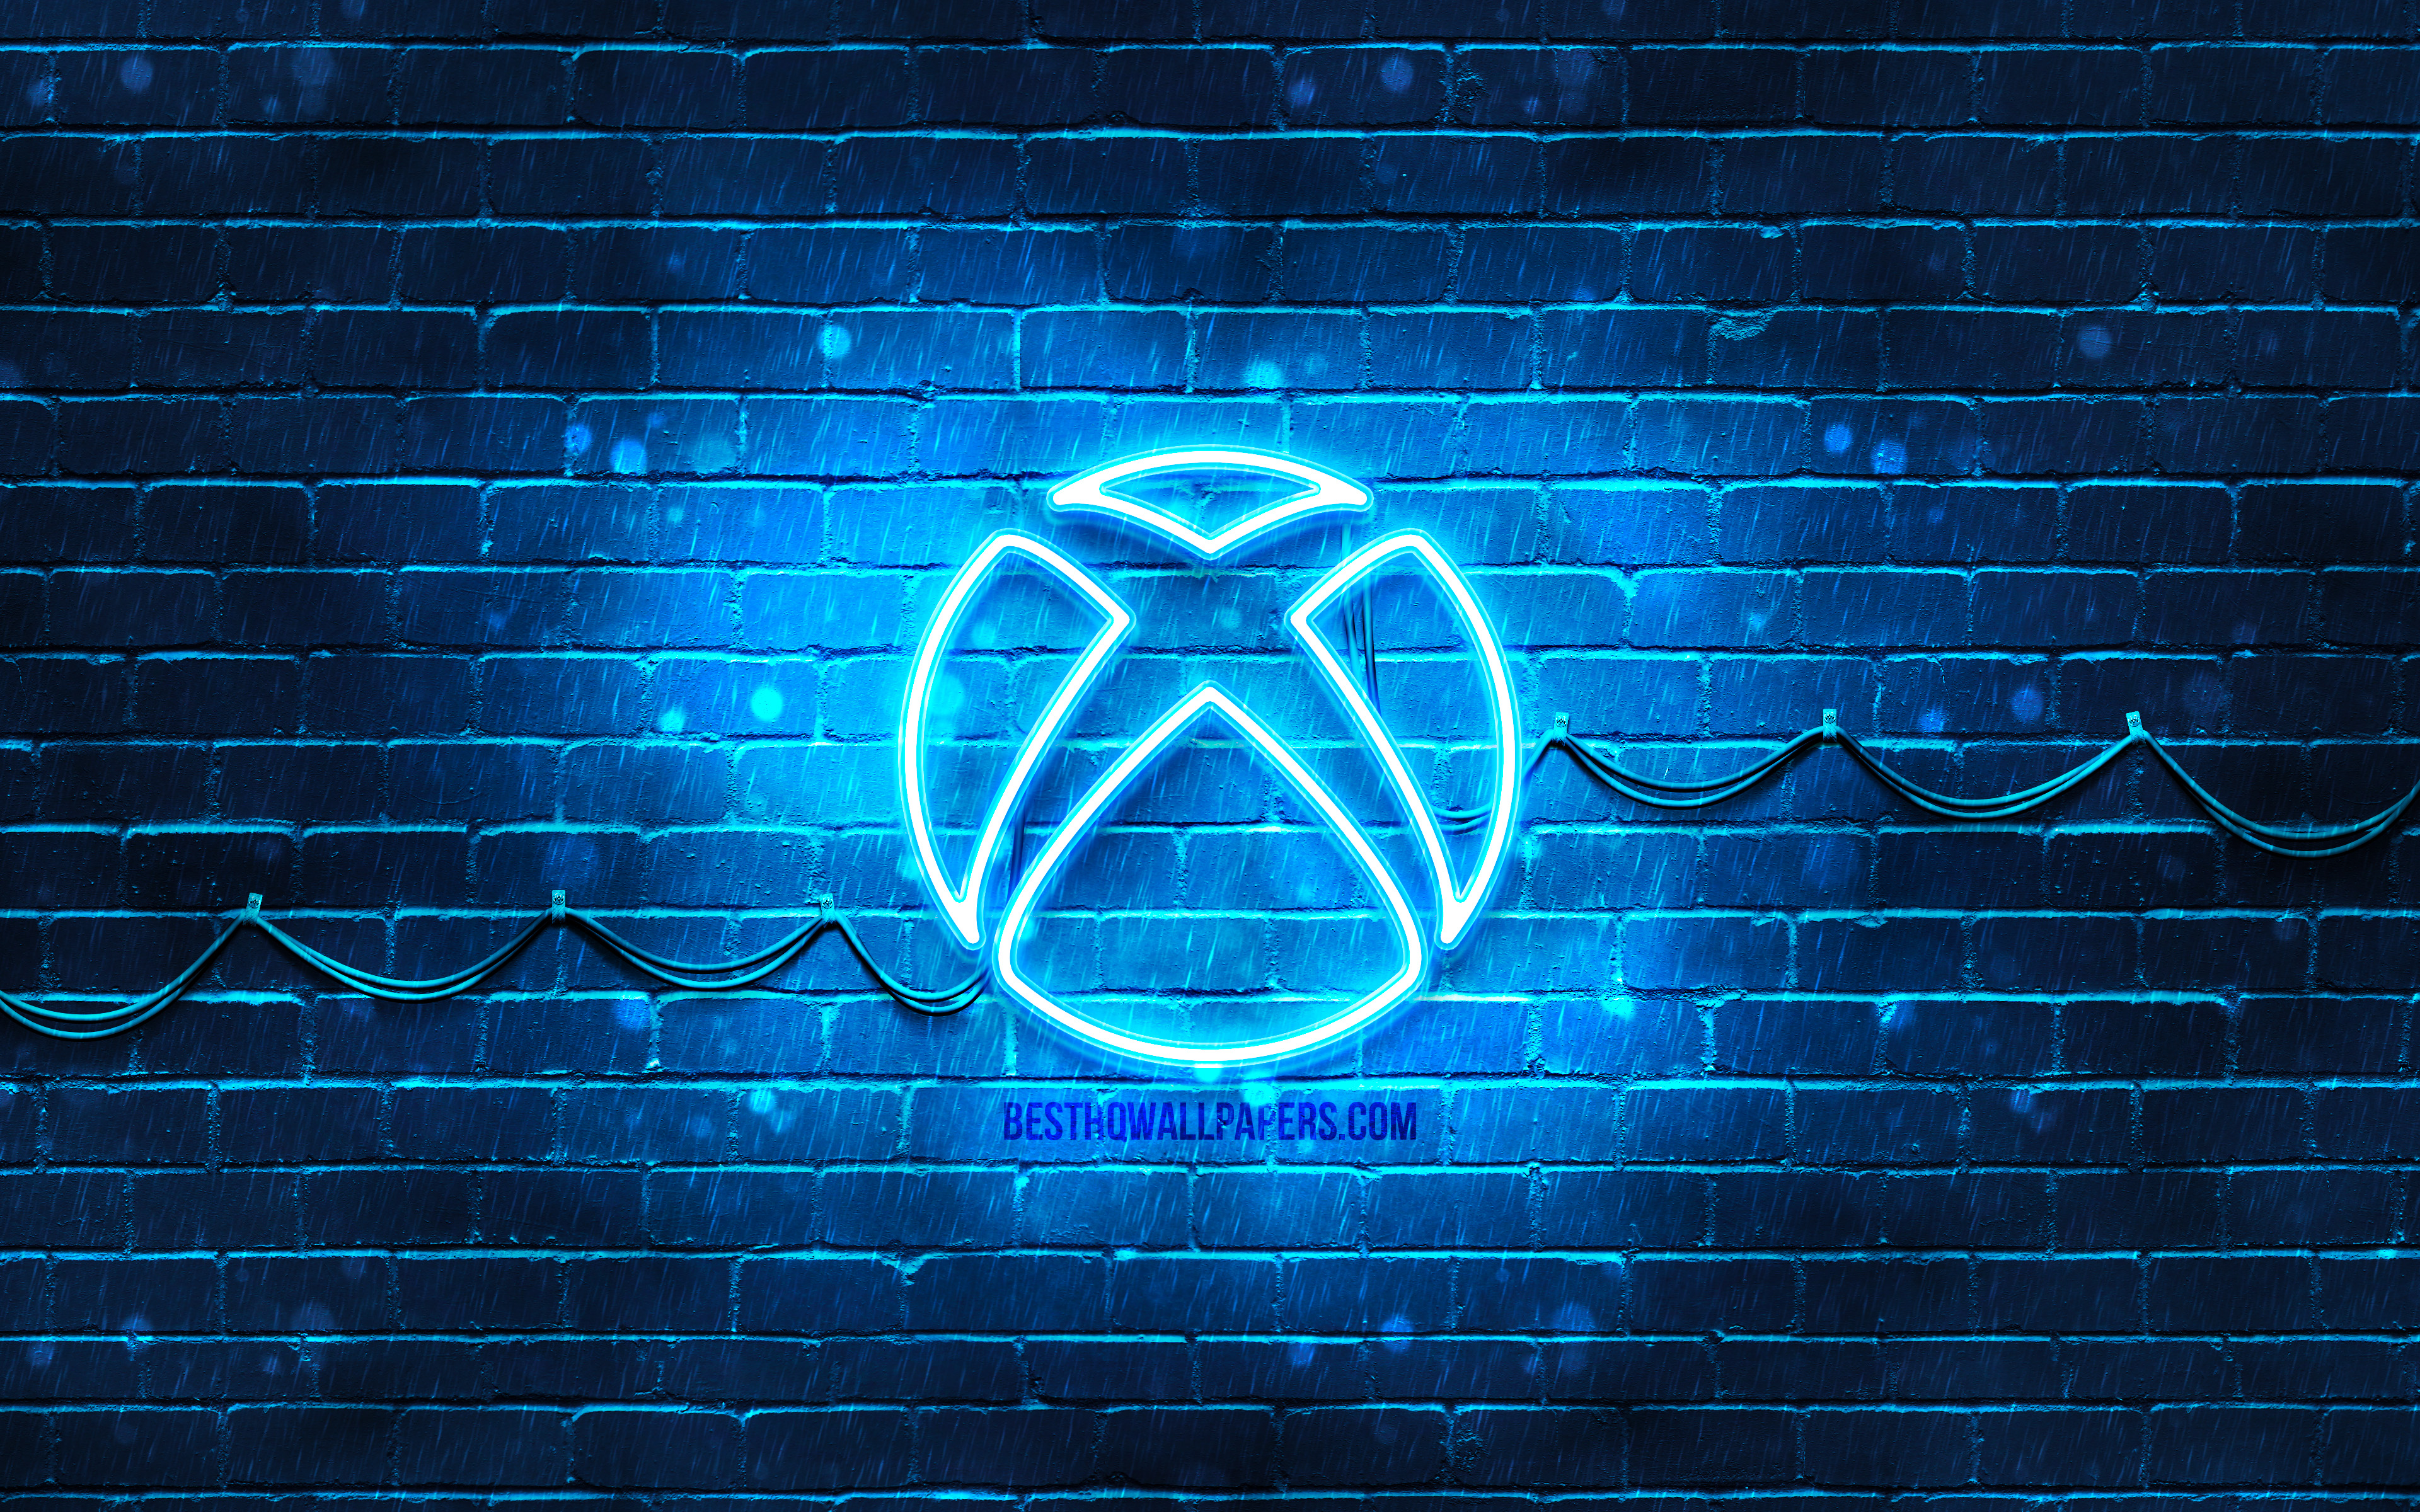 Download wallpaper Xbox blue logo, 4k, blue brickwall, Xbox logo, brands, Xbox neon logo, Xbox for desktop with resolution 3840x2400. High Quality HD picture wallpaper